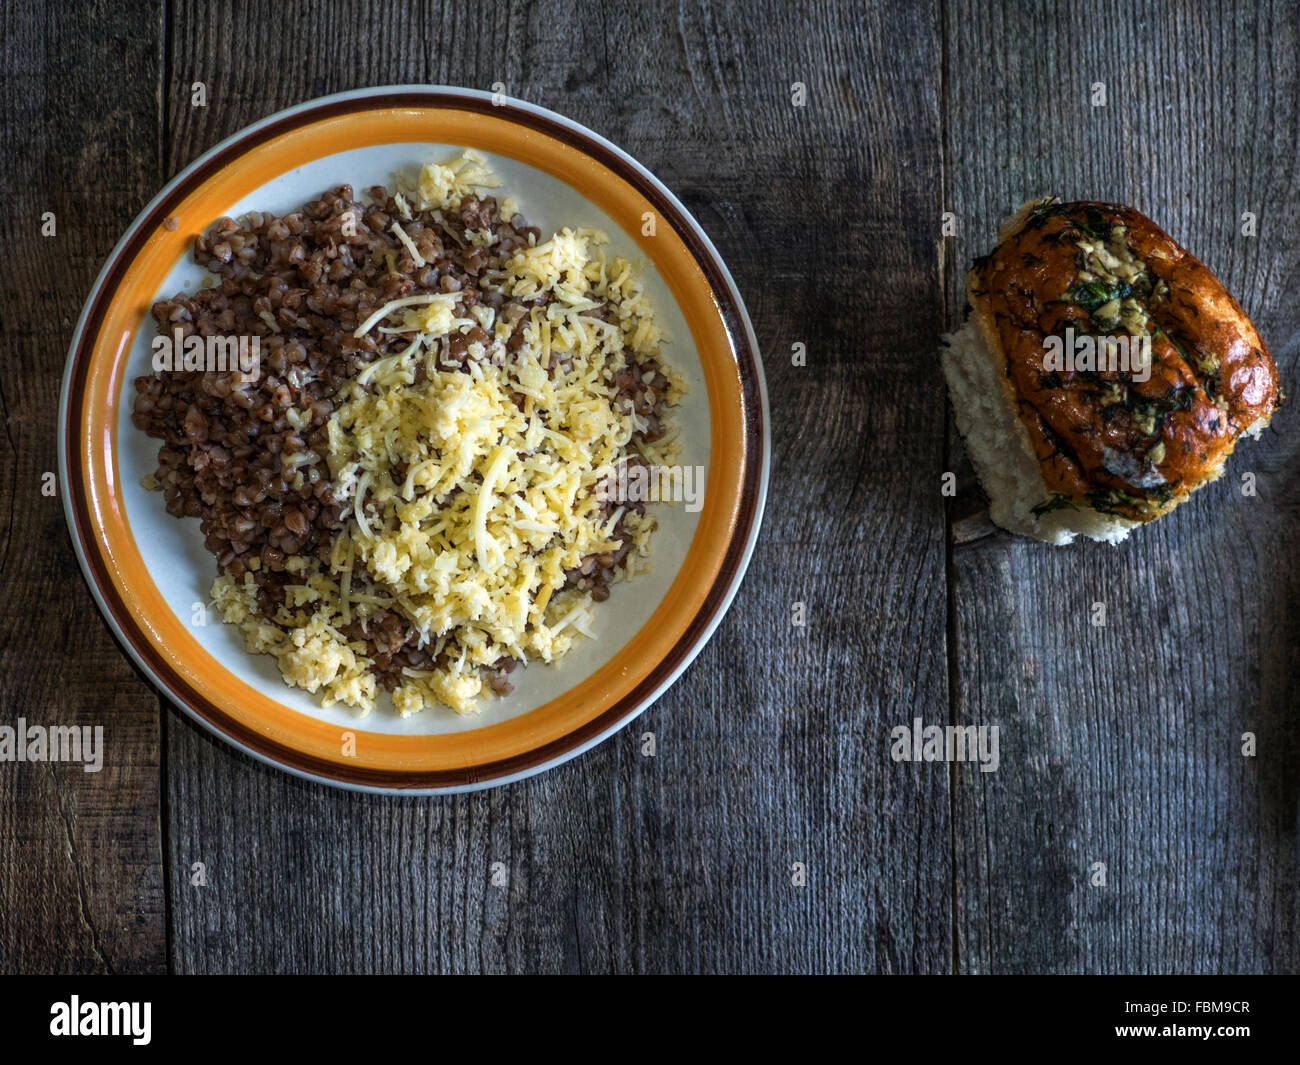 Buckwheat porridge with grated cheese on a plate Stock Photo